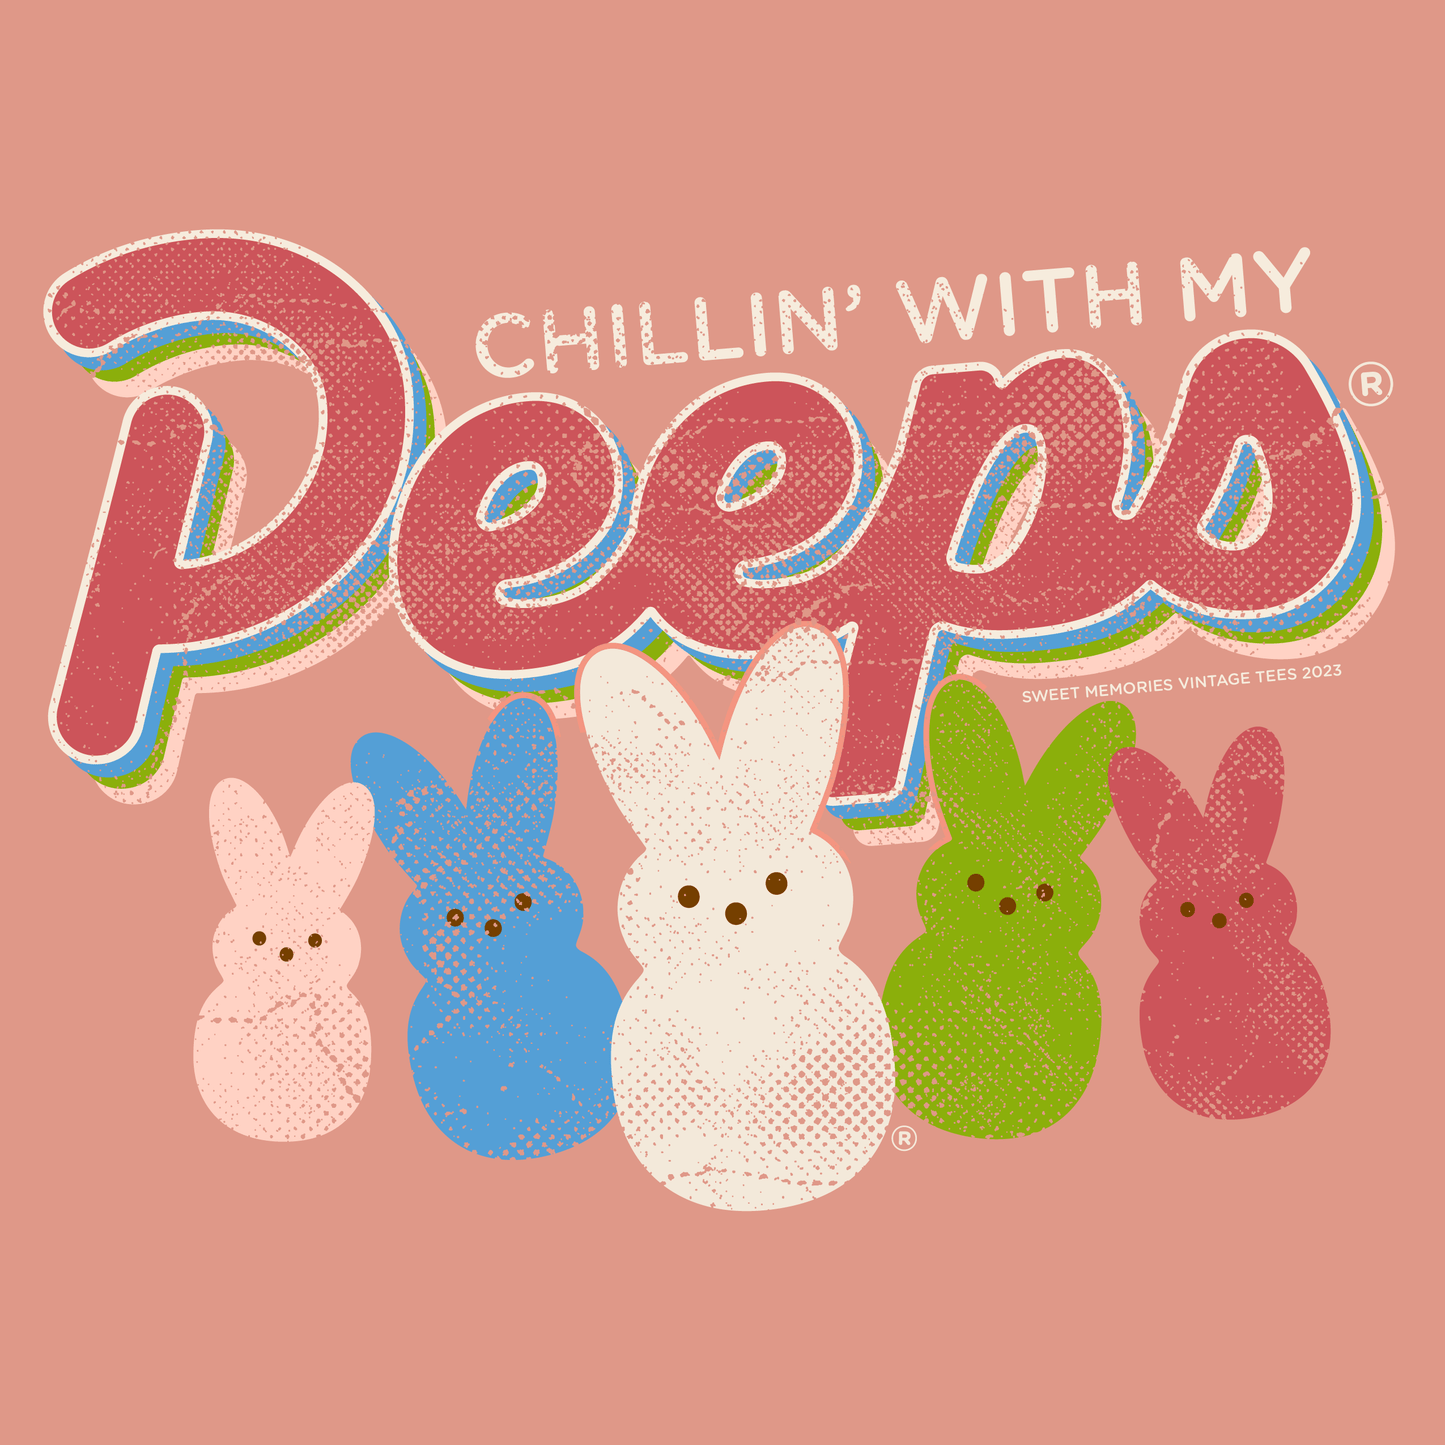 Chillin' With My Peeps Unisex Graphic Tee